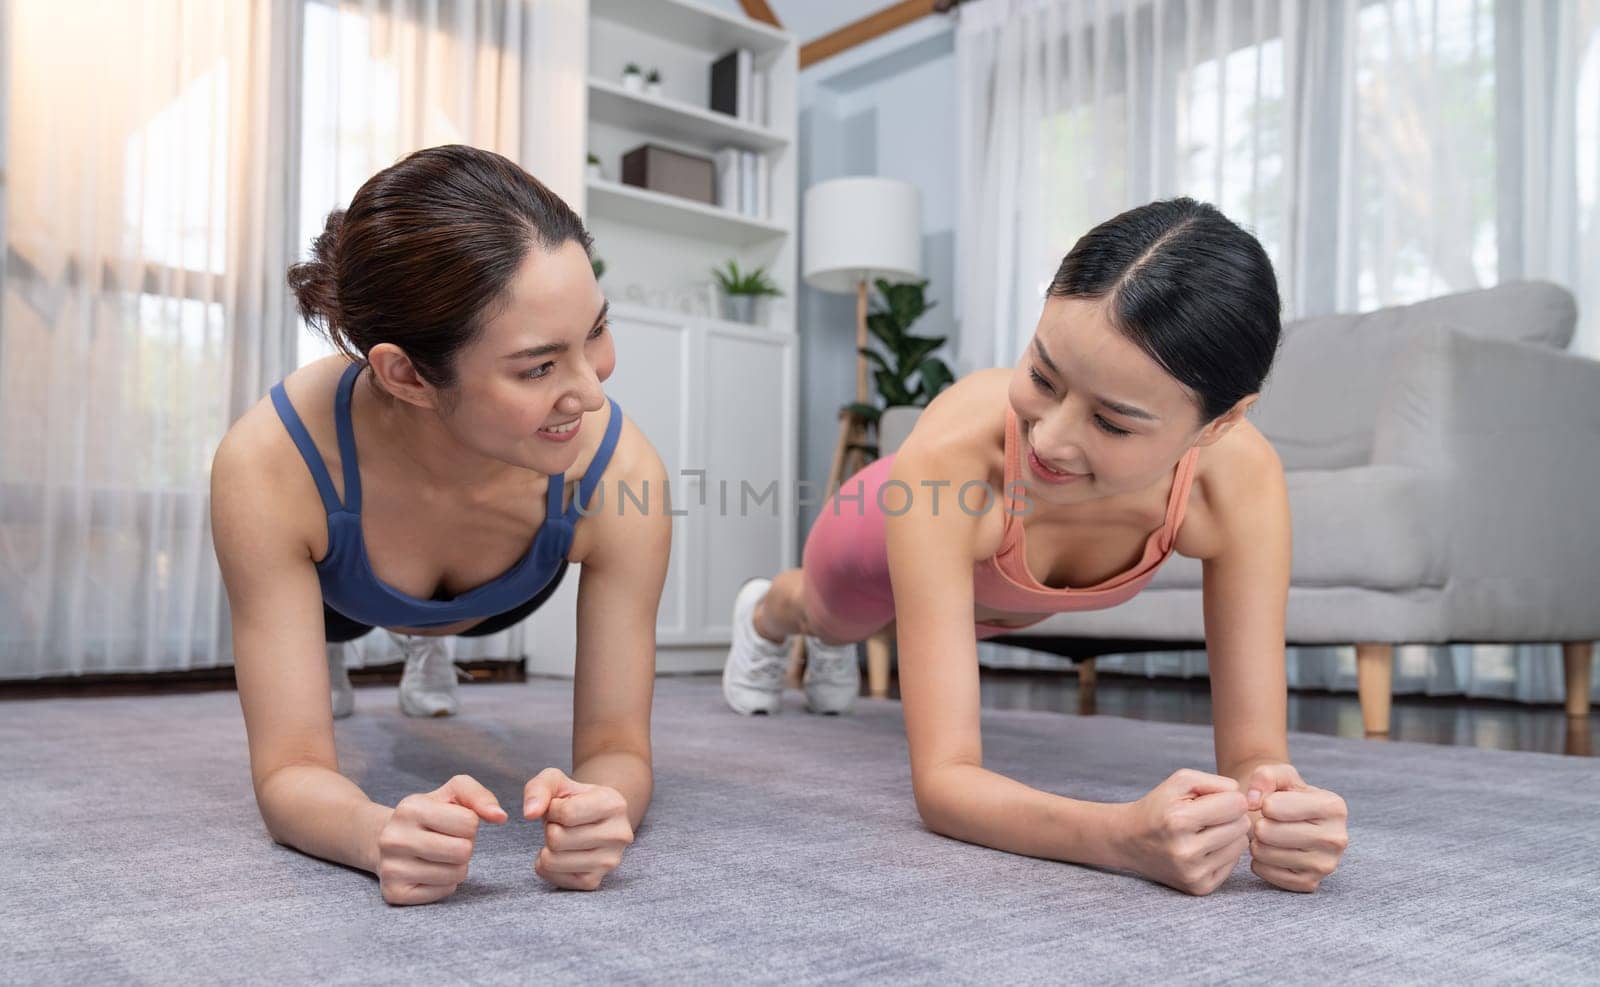 Fit young asian people planing on the living room floor. Vigorous by biancoblue